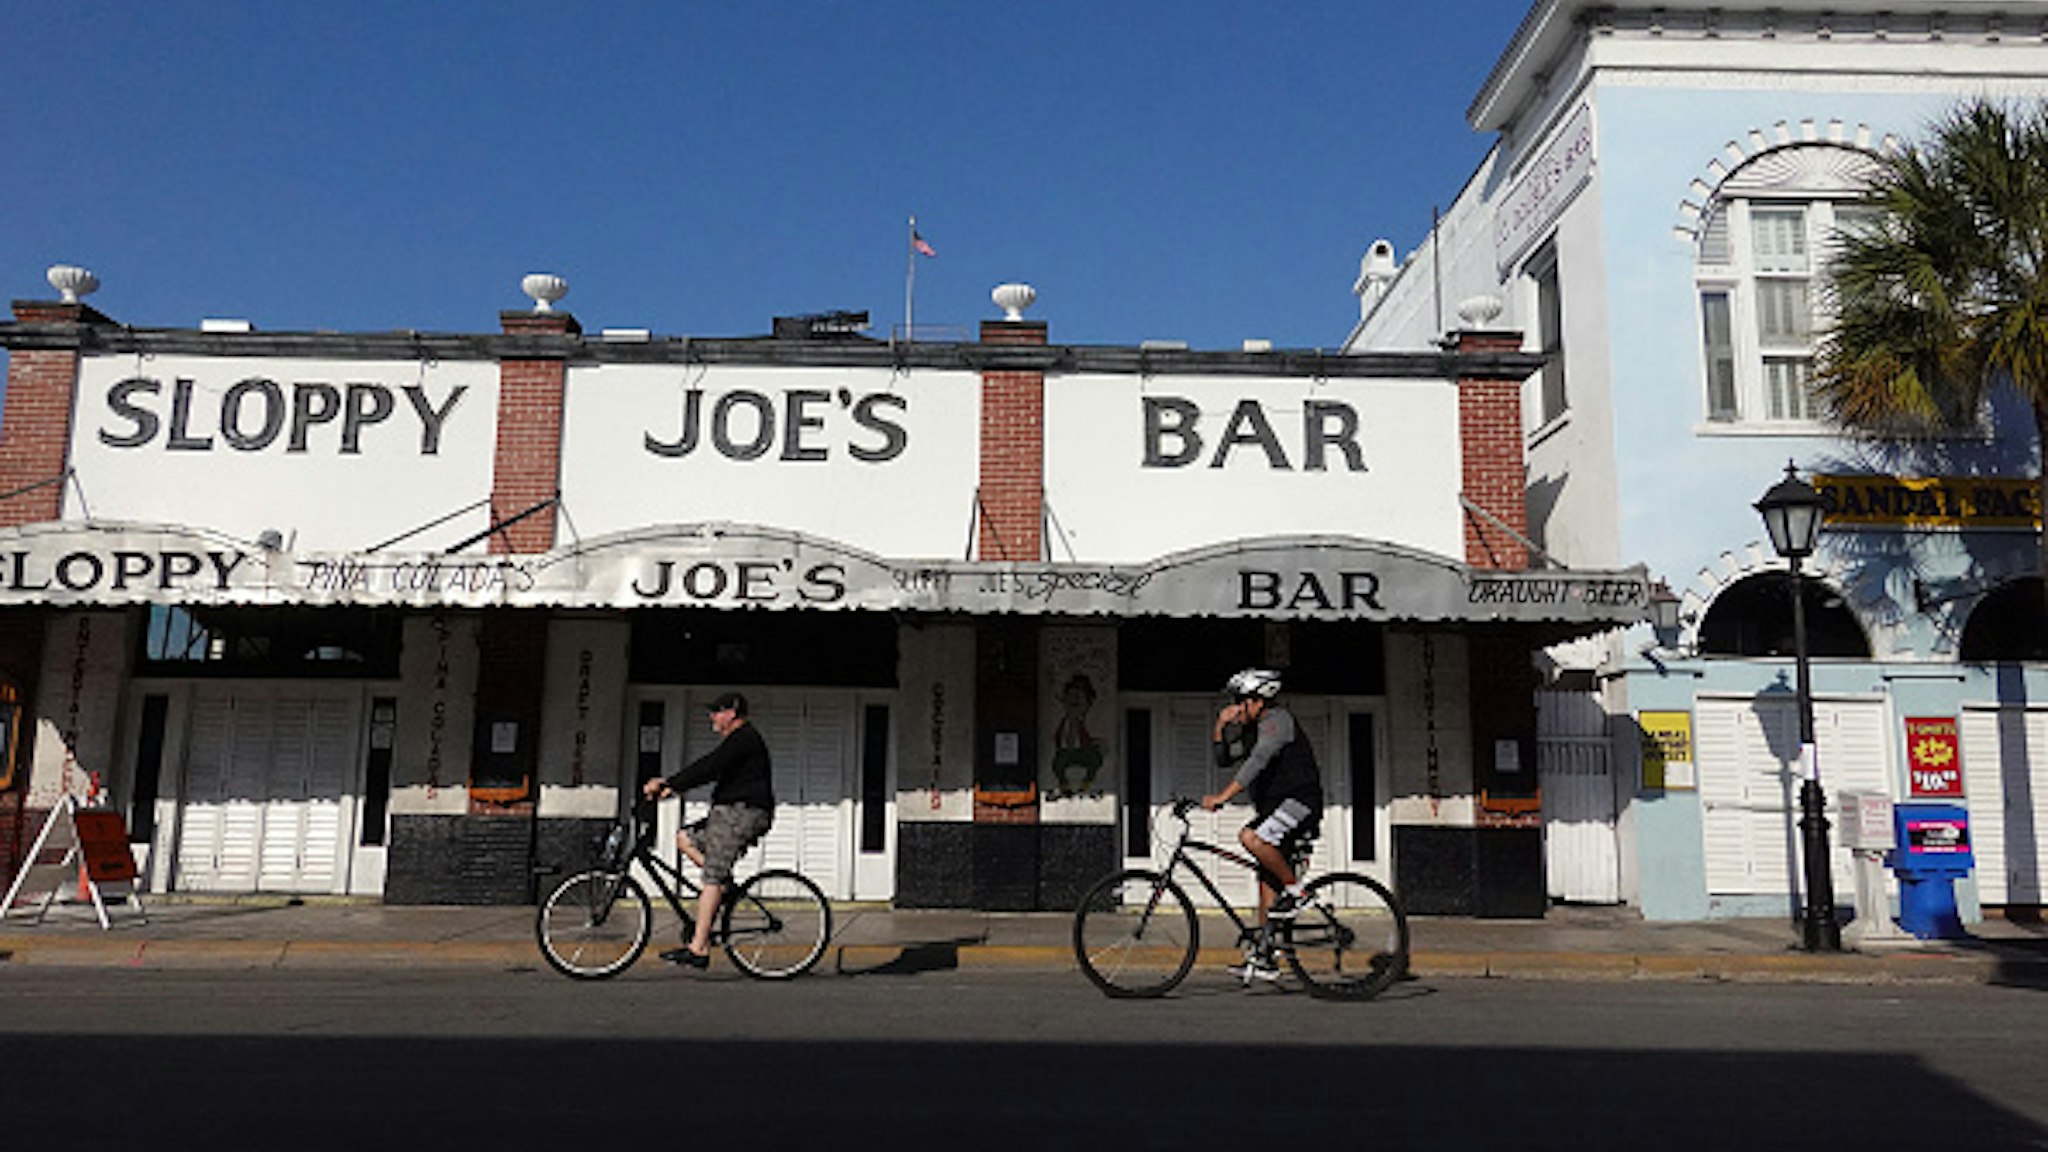 KEY WEST, FLORIDA - MARCH 25: The famous Sloppy Joe's Bar is seen after it closed as the city government takes steps to fight the coronavirus outbreak on March 25, 2020 in Key West, Florida. Most tourists have left Key West as the city closed hotels or short-term vacation rentals and asked restaurants to only serve take-out. Beaches and parks have been closed and starting Friday non-residents may not enter without proof of employment or property ownership in the Florida Keys as city officials attempt to contain COVID-19.